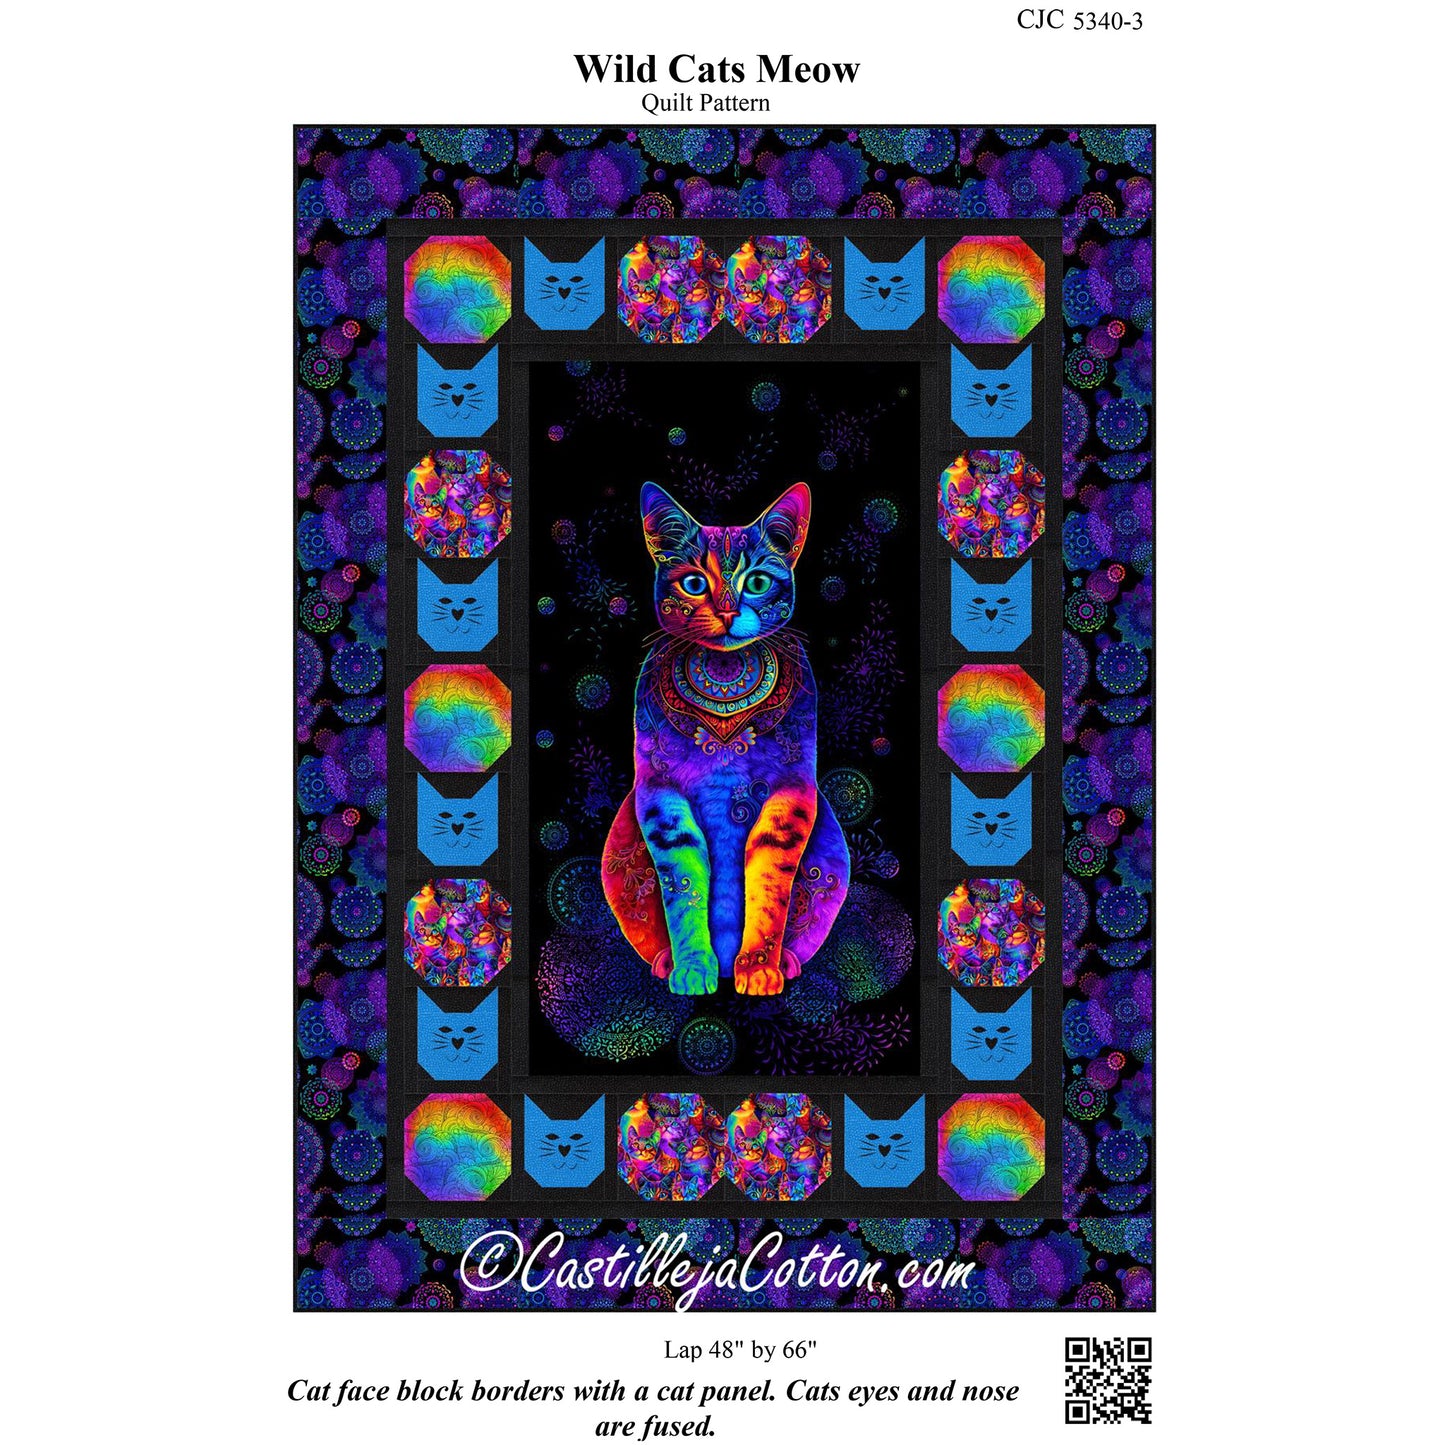 Cover image of pattern for Wild Cats Meow Quilt.